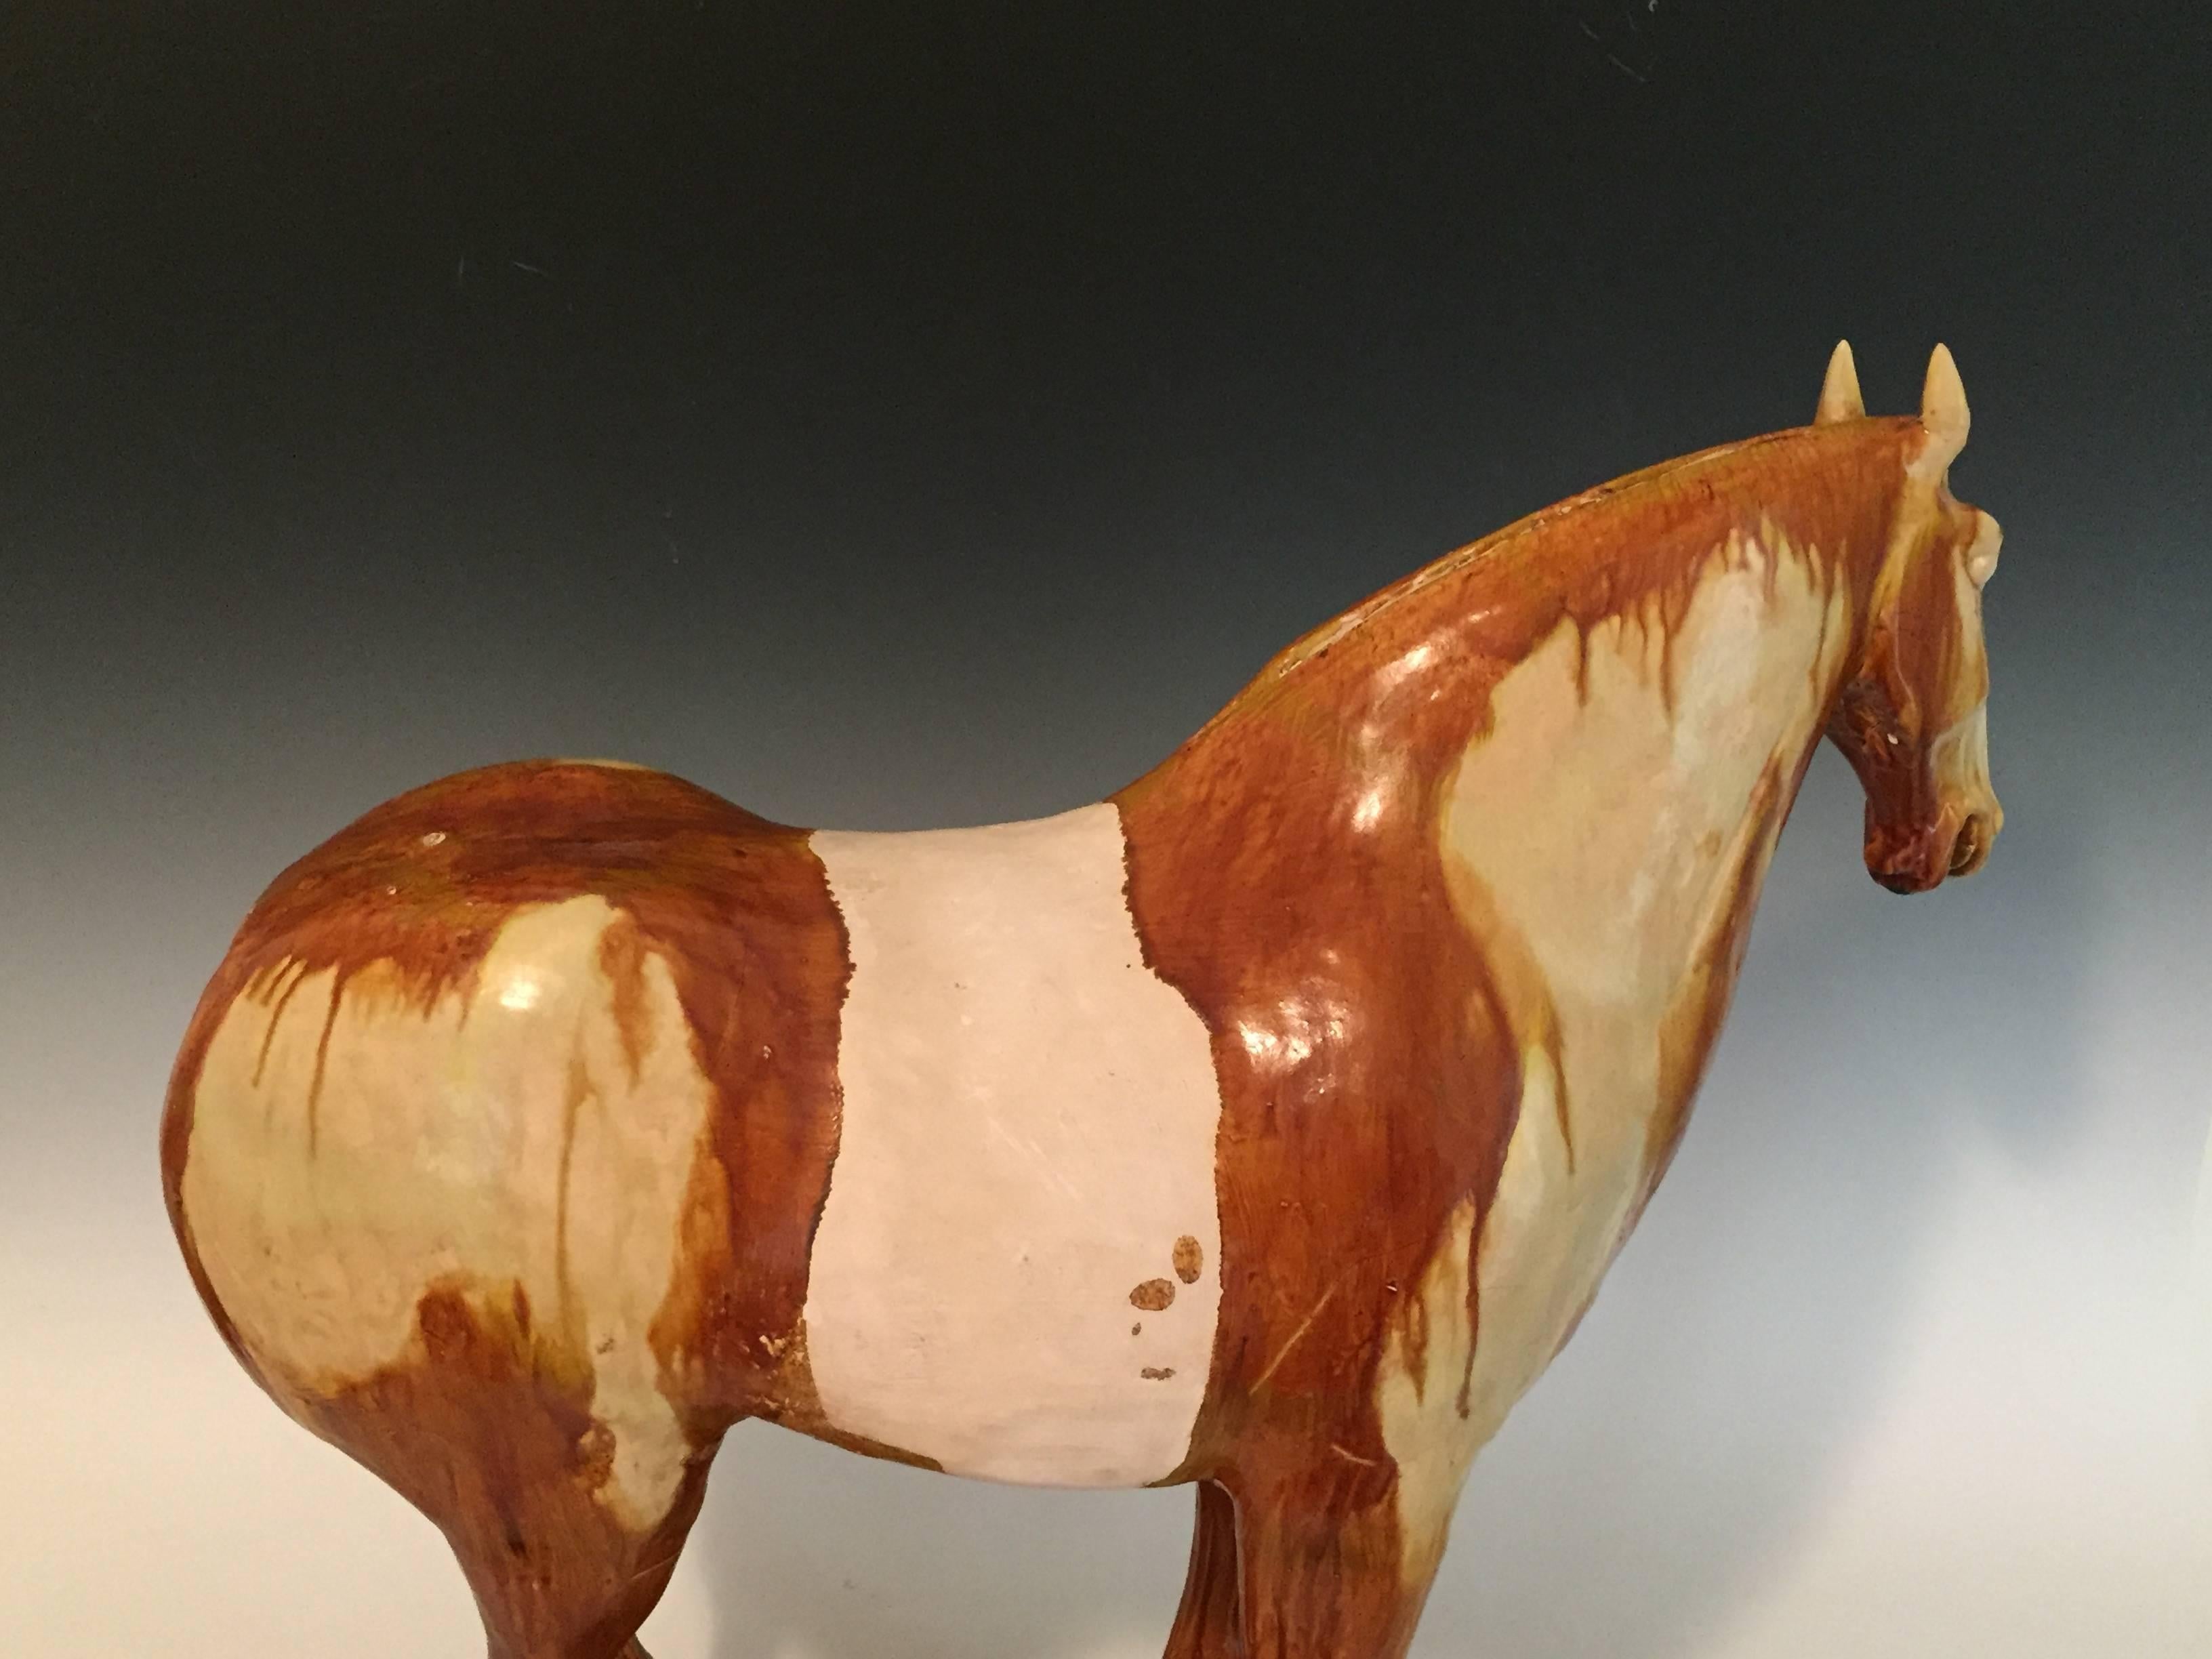 8th century Tang Dynasty horse coated in amber and cream colored glaze. Standing on two small bases to support the front and back legs. Saddle area unglazed.
With TL Test from Oxford Laboratories.
Measures: 22-3/4” high x 22-3/4” long x 7-1/2”